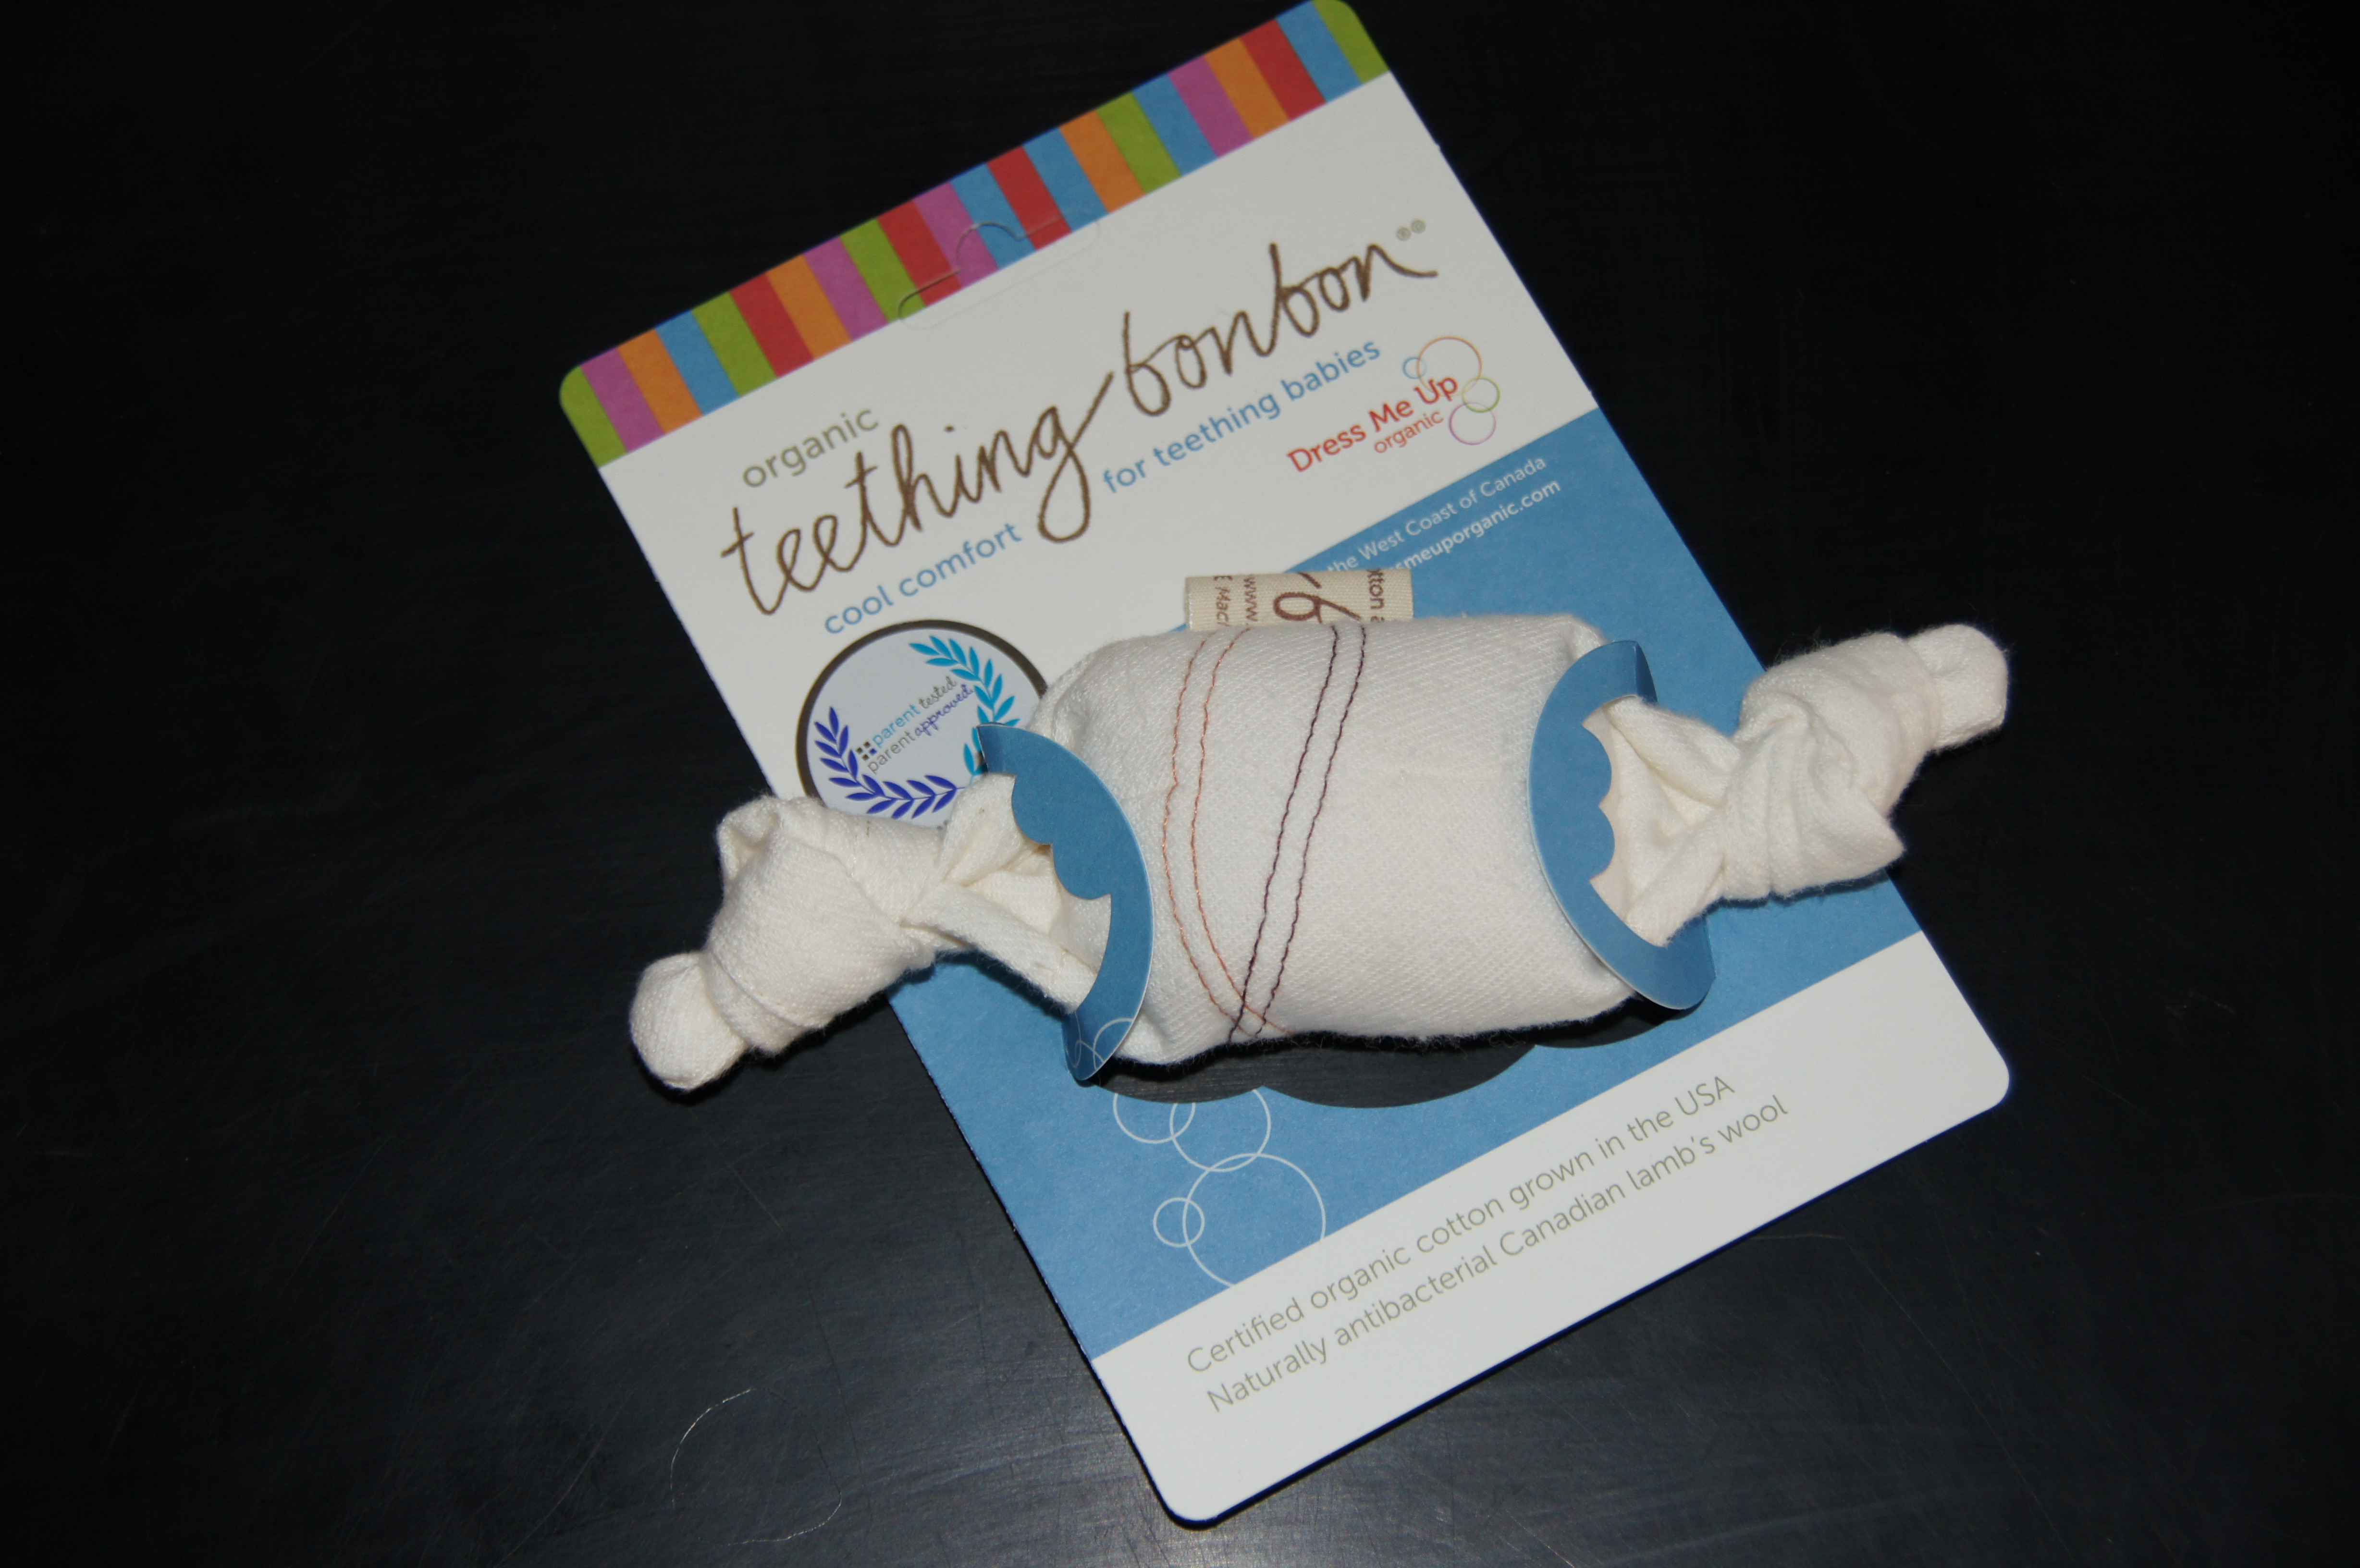 Product Review: Teething Bonbon from Dress Me Up Organic